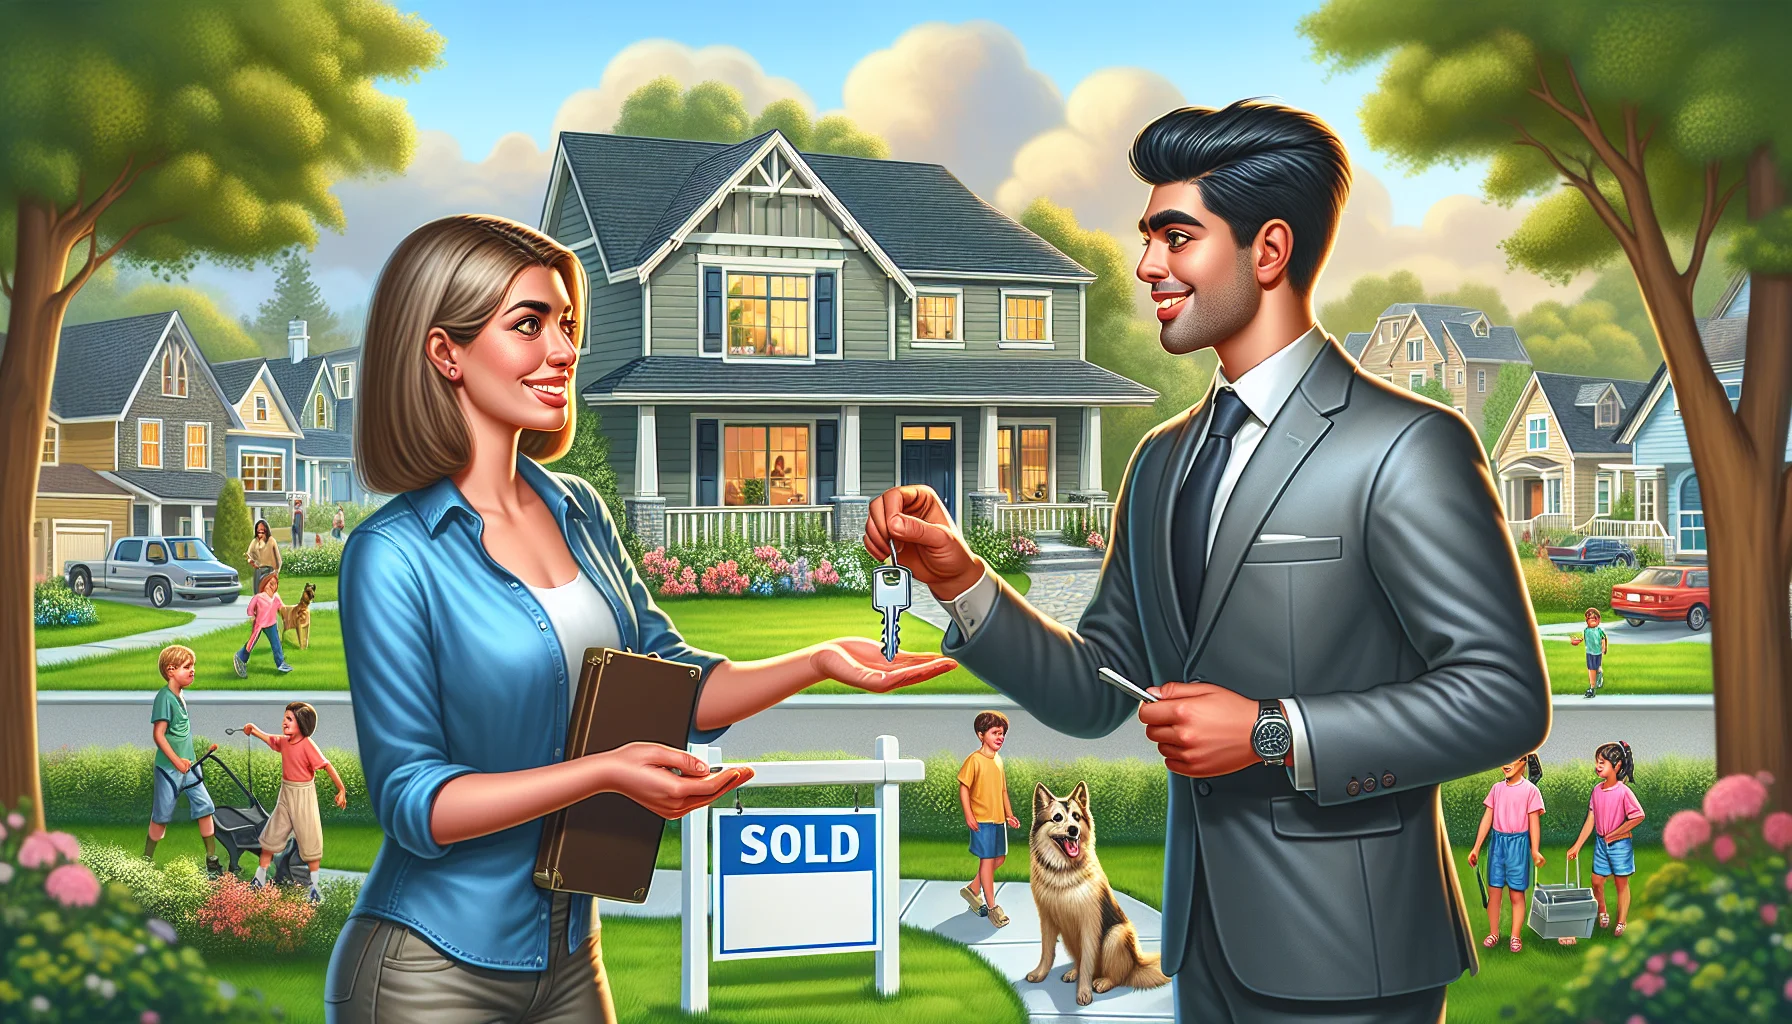 Create a humorous, realistic image that showcases the ideal scenario of purchasing a second property to be utilized as a primary residence in a thriving real estate market. The scene includes a Caucasian female realtor handing over the house keys to a Middle-Eastern male buyer. They are standing in front of a beautiful, two-story cottage with a 'Sold' sign out front. The background sports a lively neighborhood with children playing, people walking dogs, and lush green parks. The buyer's face is radiating with joy, a reflection of his successful real estate investment.